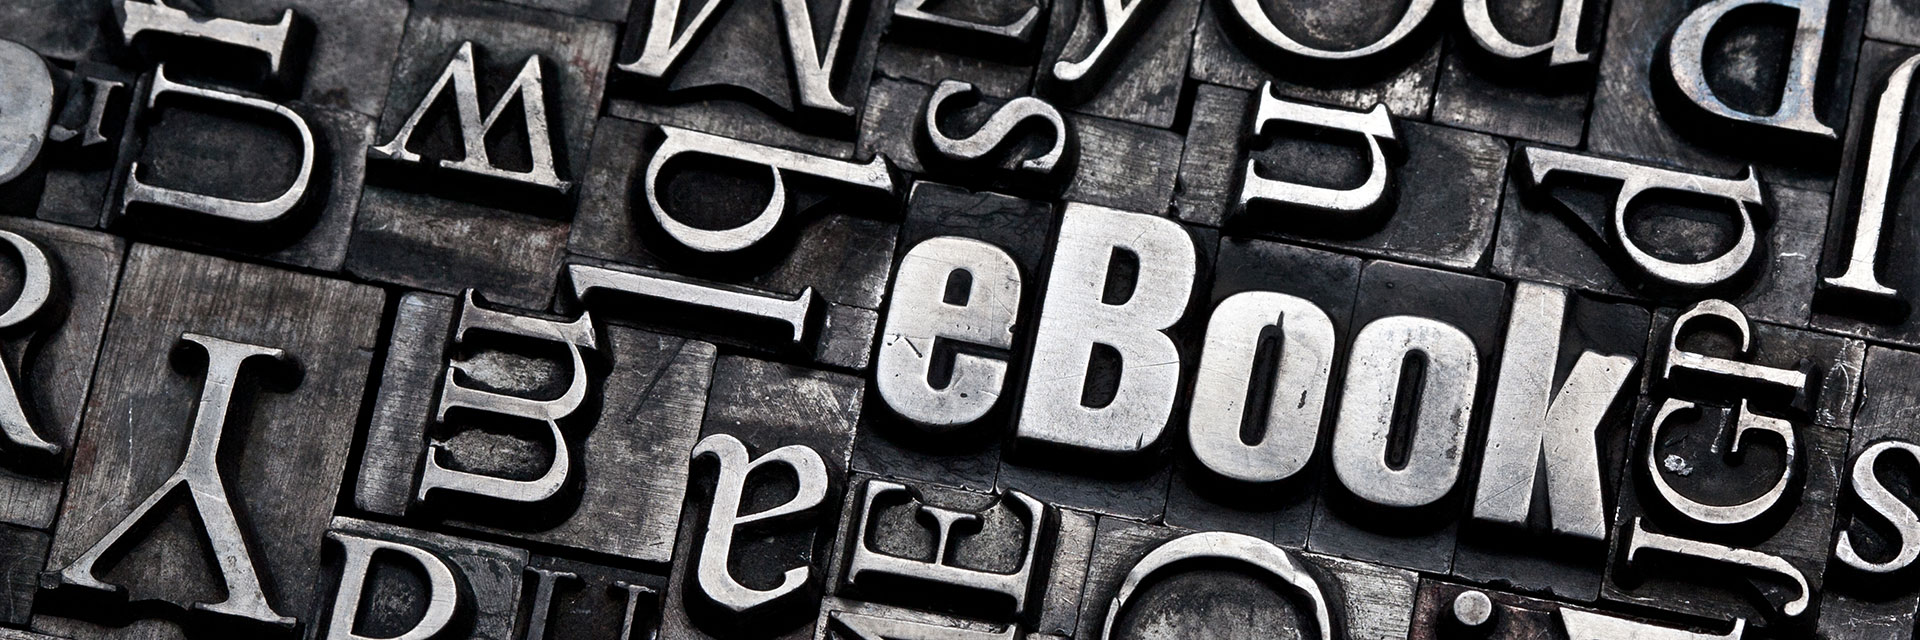 movable type spelling out "ebook"